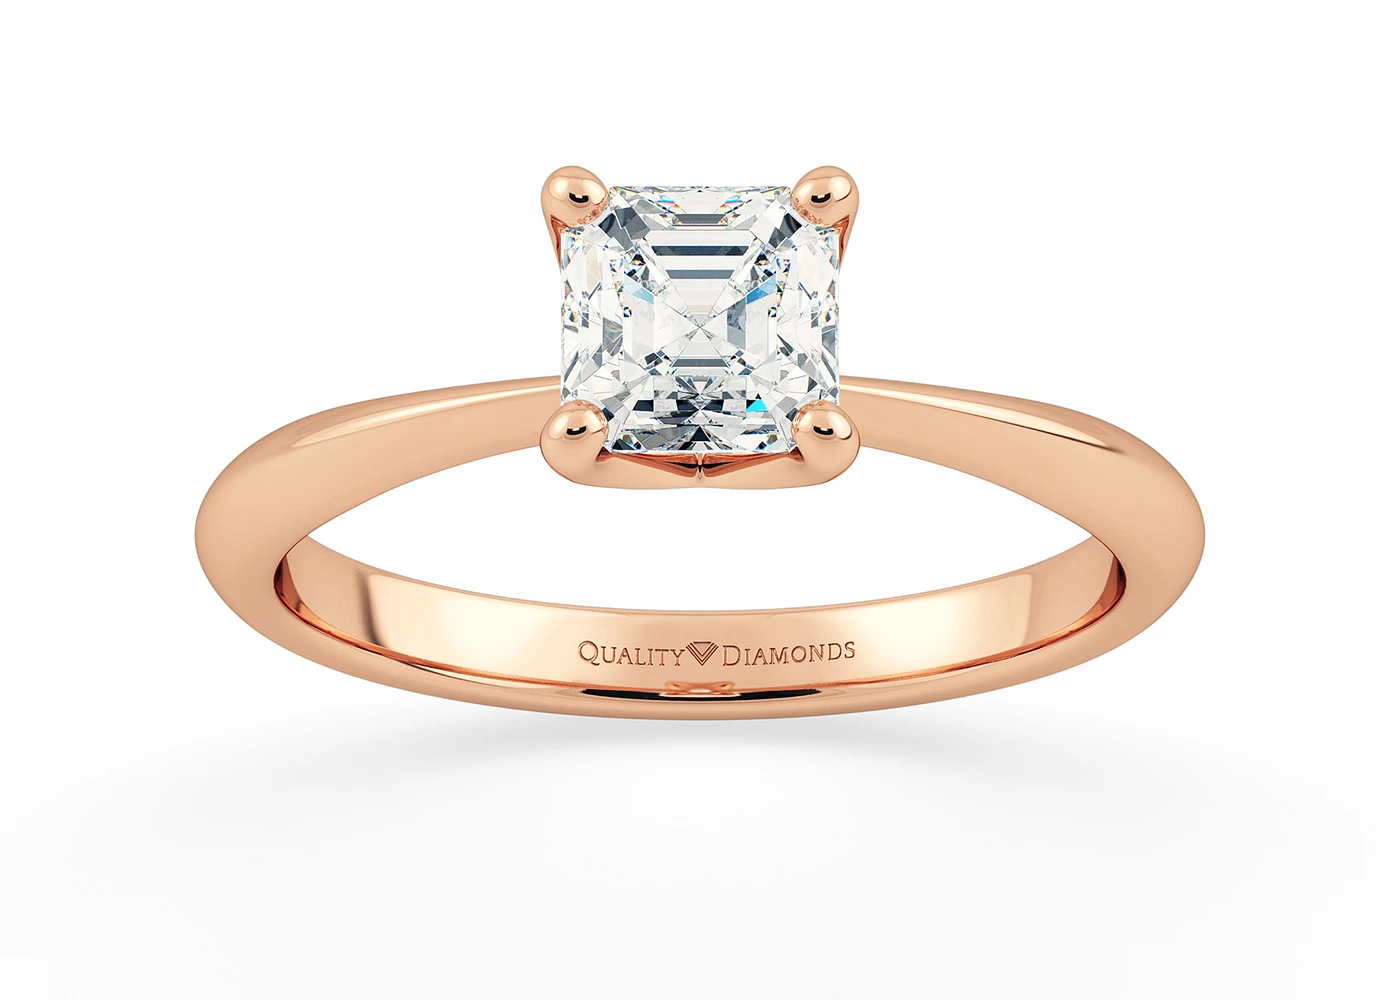 One Carat Asscher Solitaire Diamond Engagement Ring in 18K Rose Gold